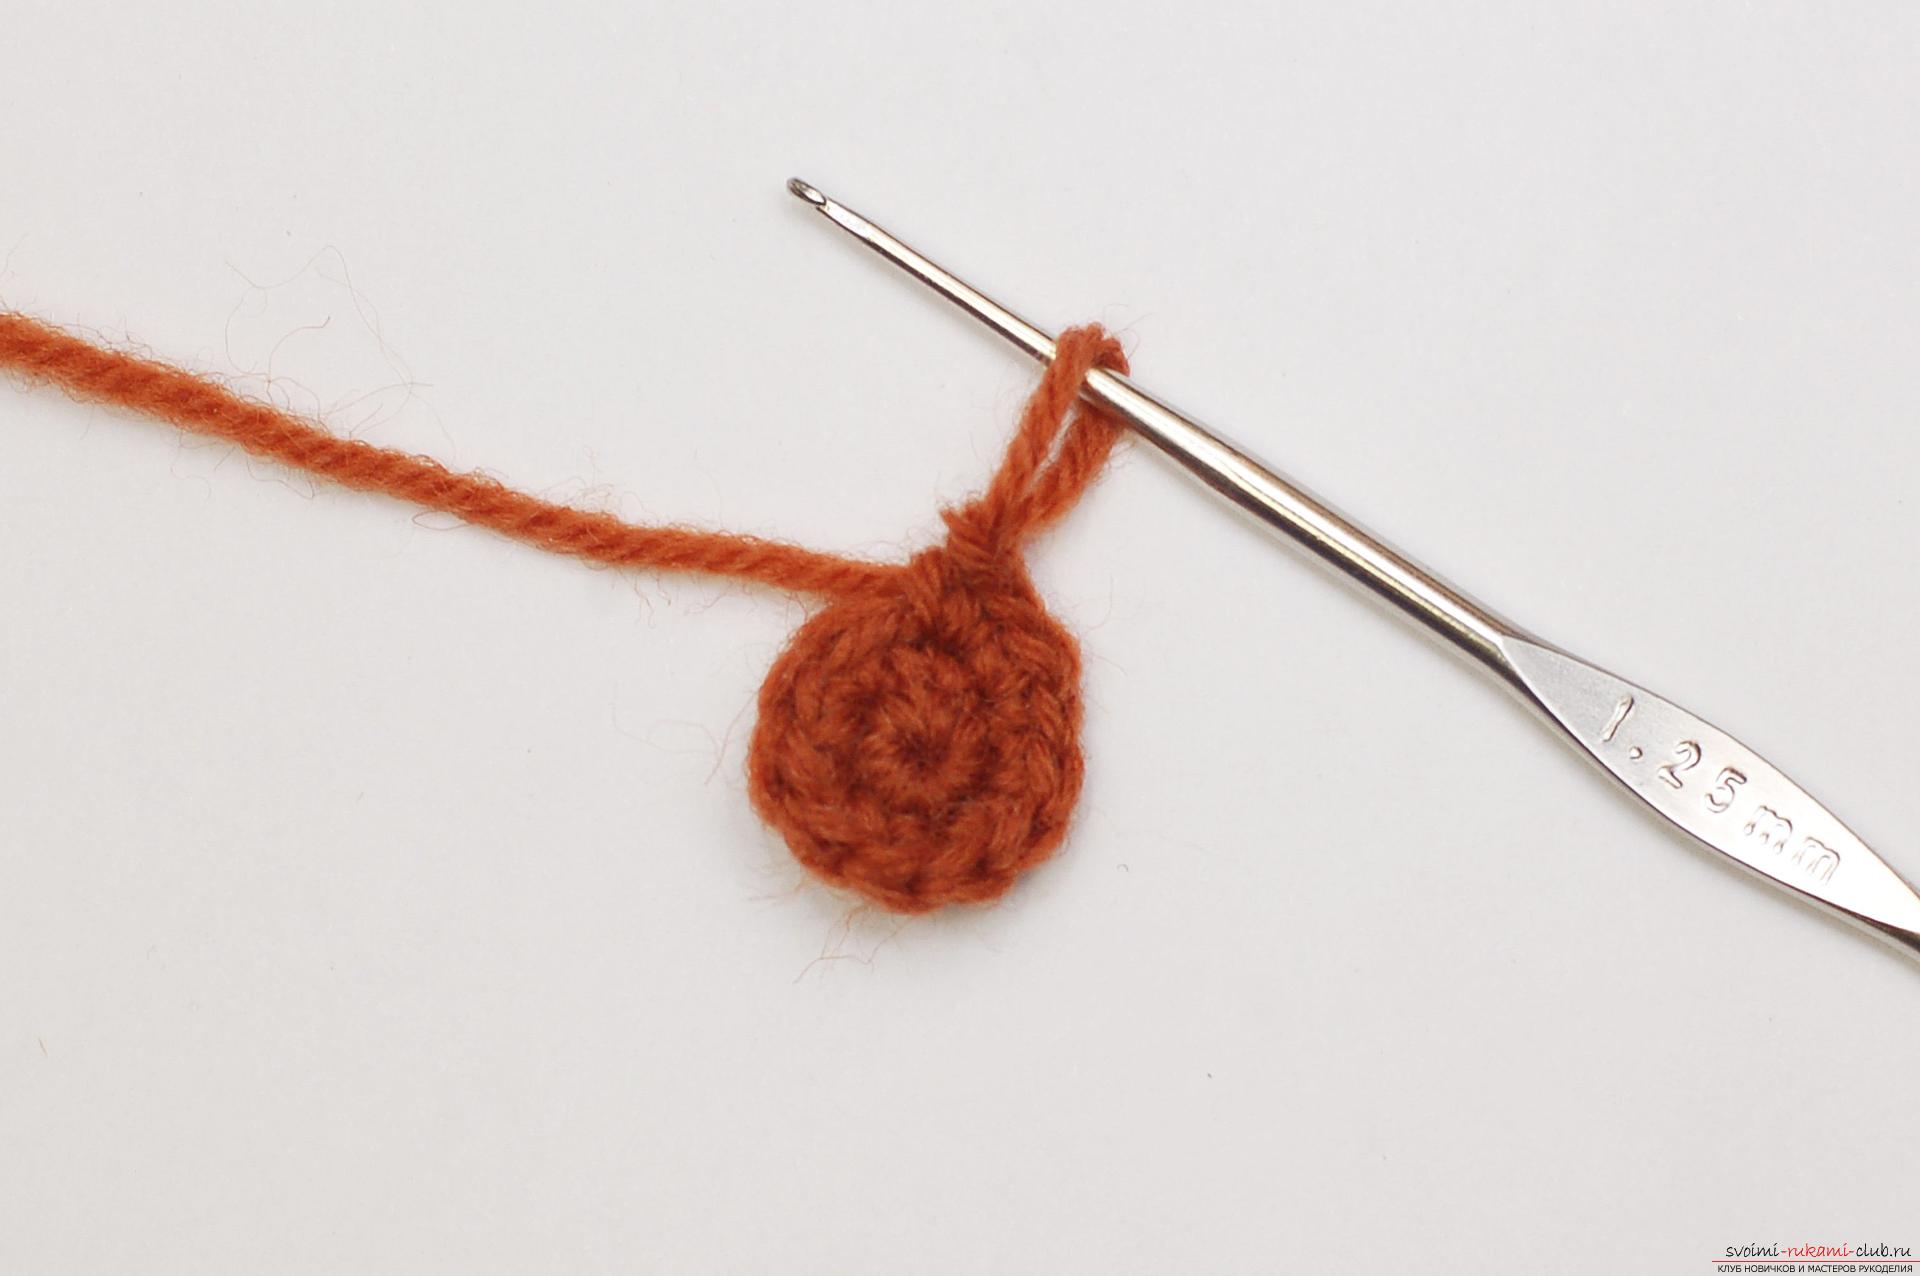 In this master class you will learn how to tie a crochet bean as a gift to the Pope on February 23. Photo # 3